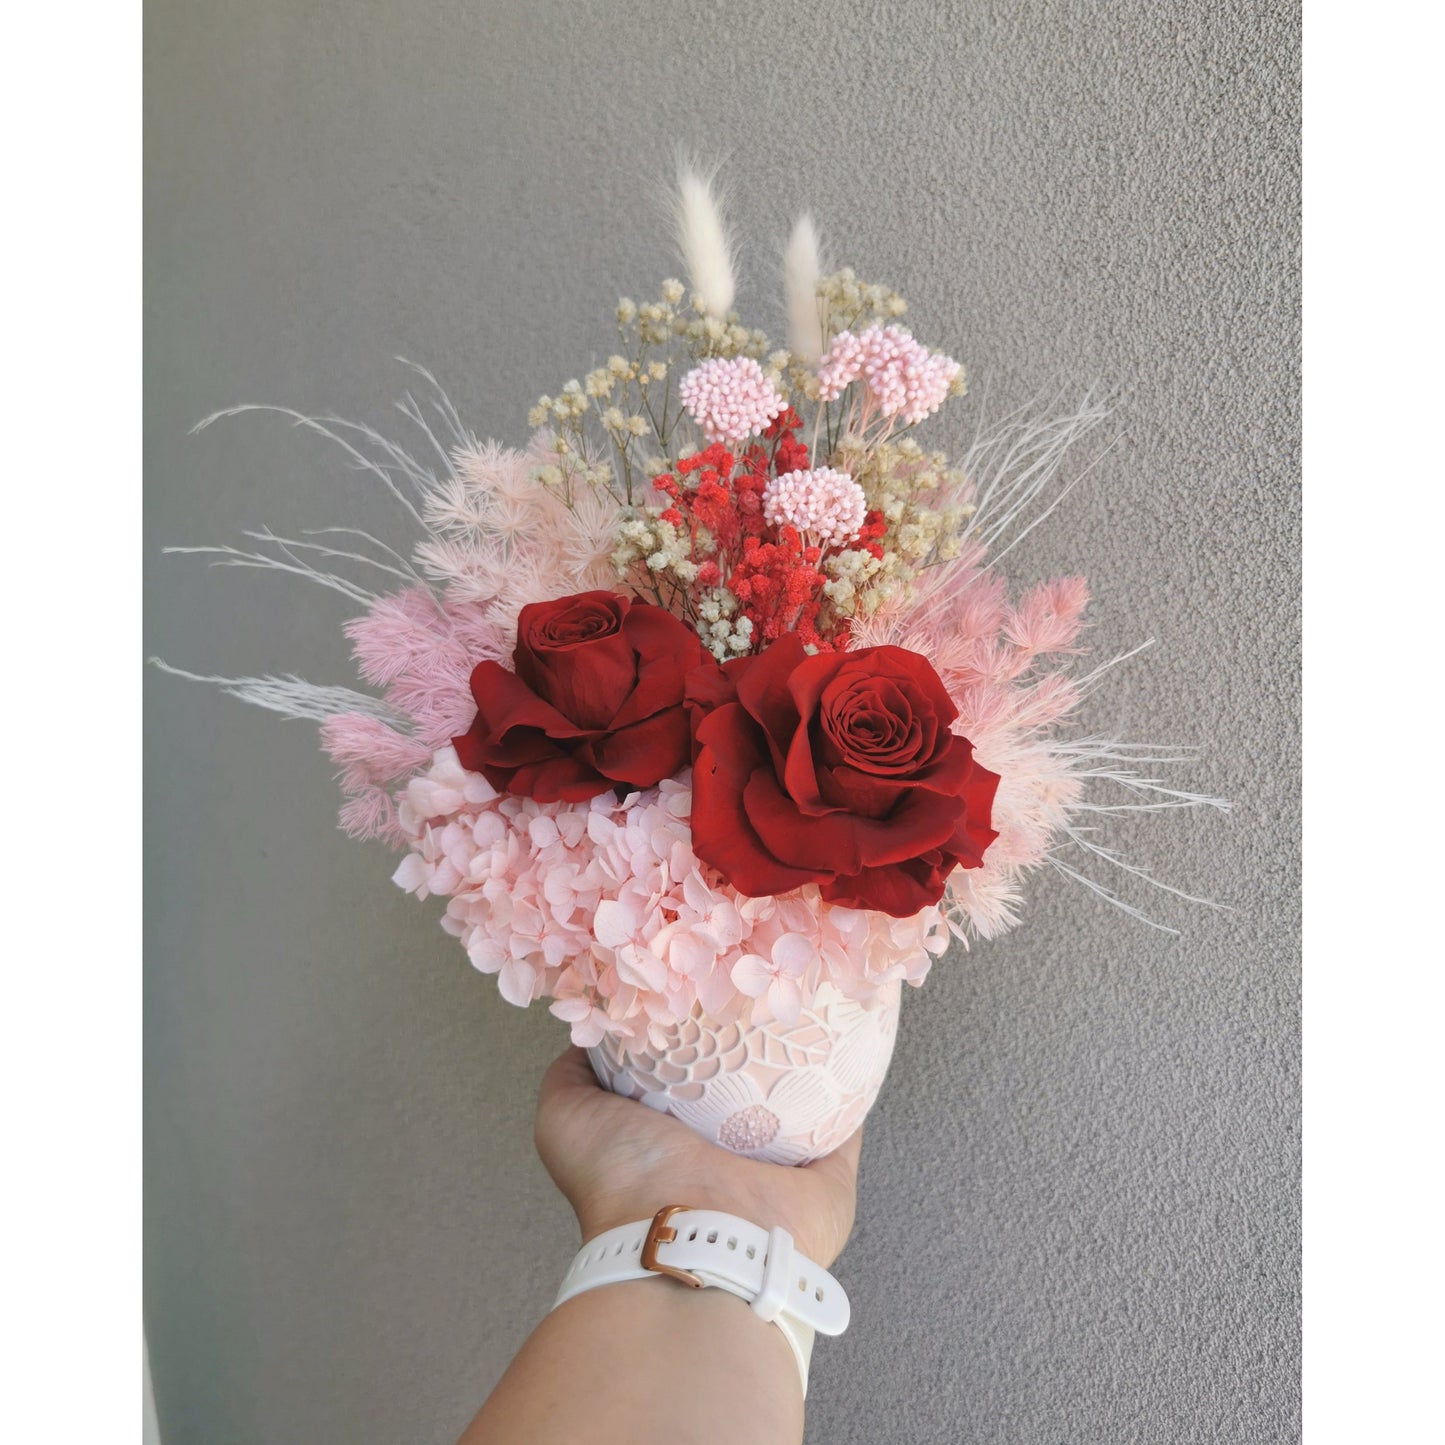 Valentines Day dried & preserved flower arrangement including 2 red roses and set in to a pink & white floral pot. Photo shows arrangement being held by hand against a blank wall